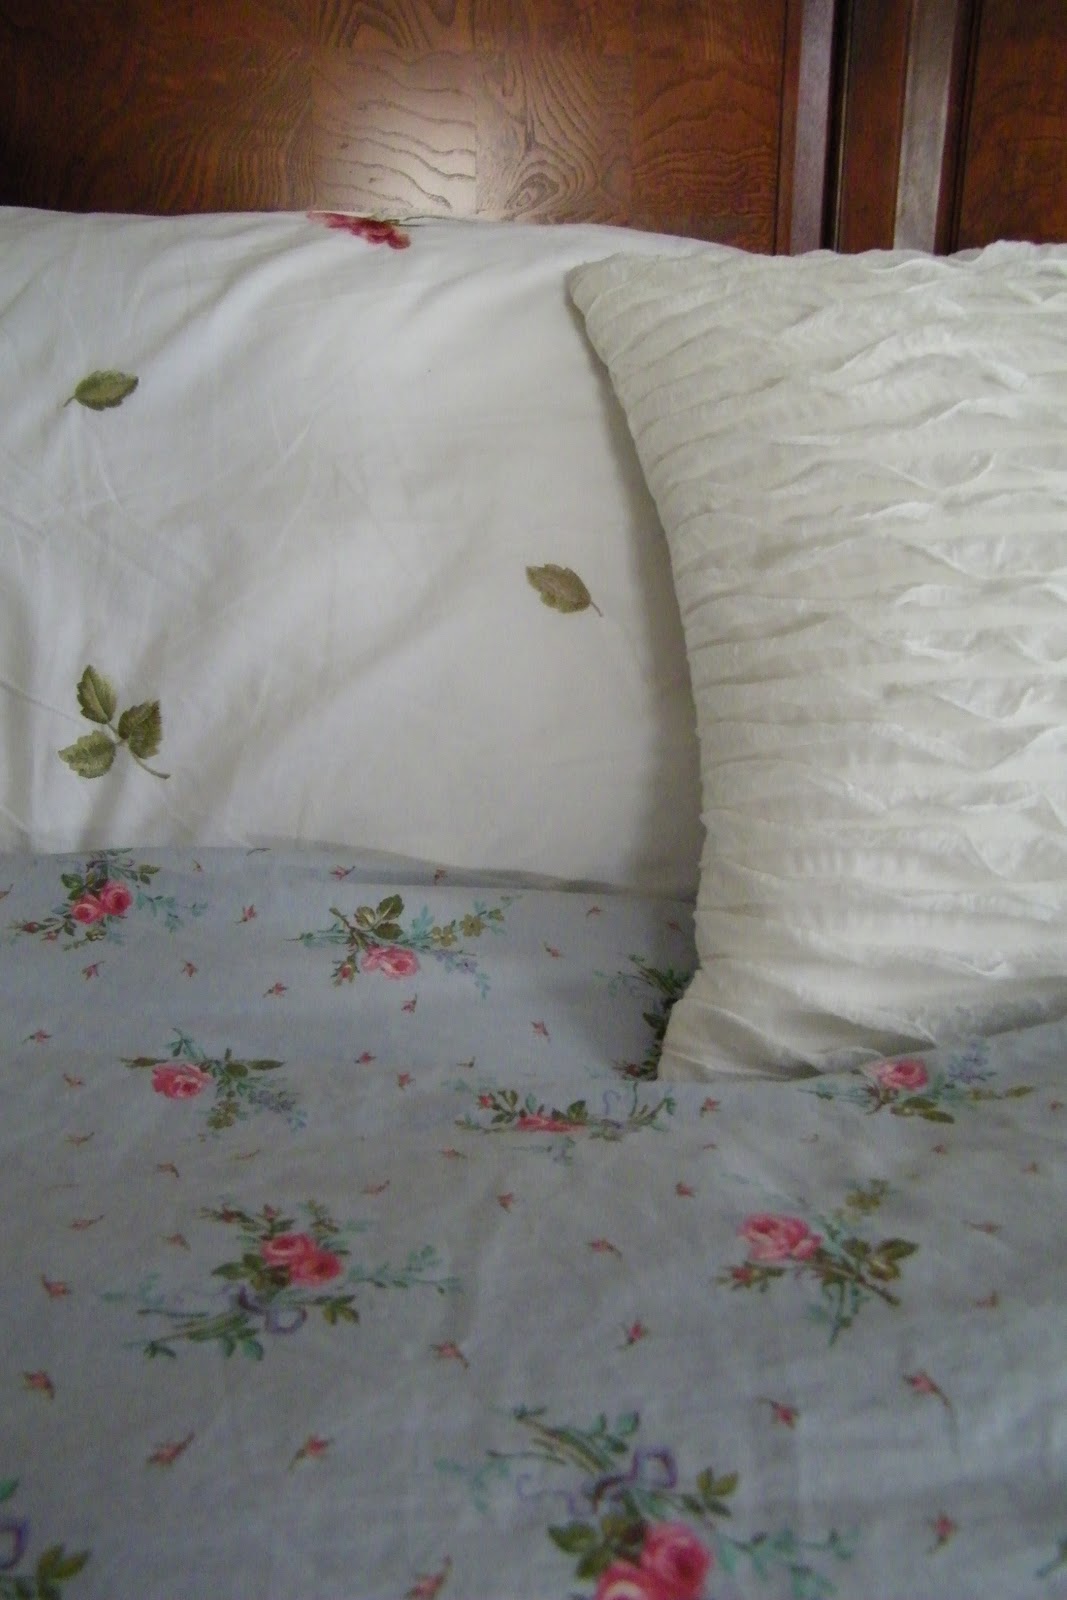 layered over a white Raymond Waites embroidered duvet cover.